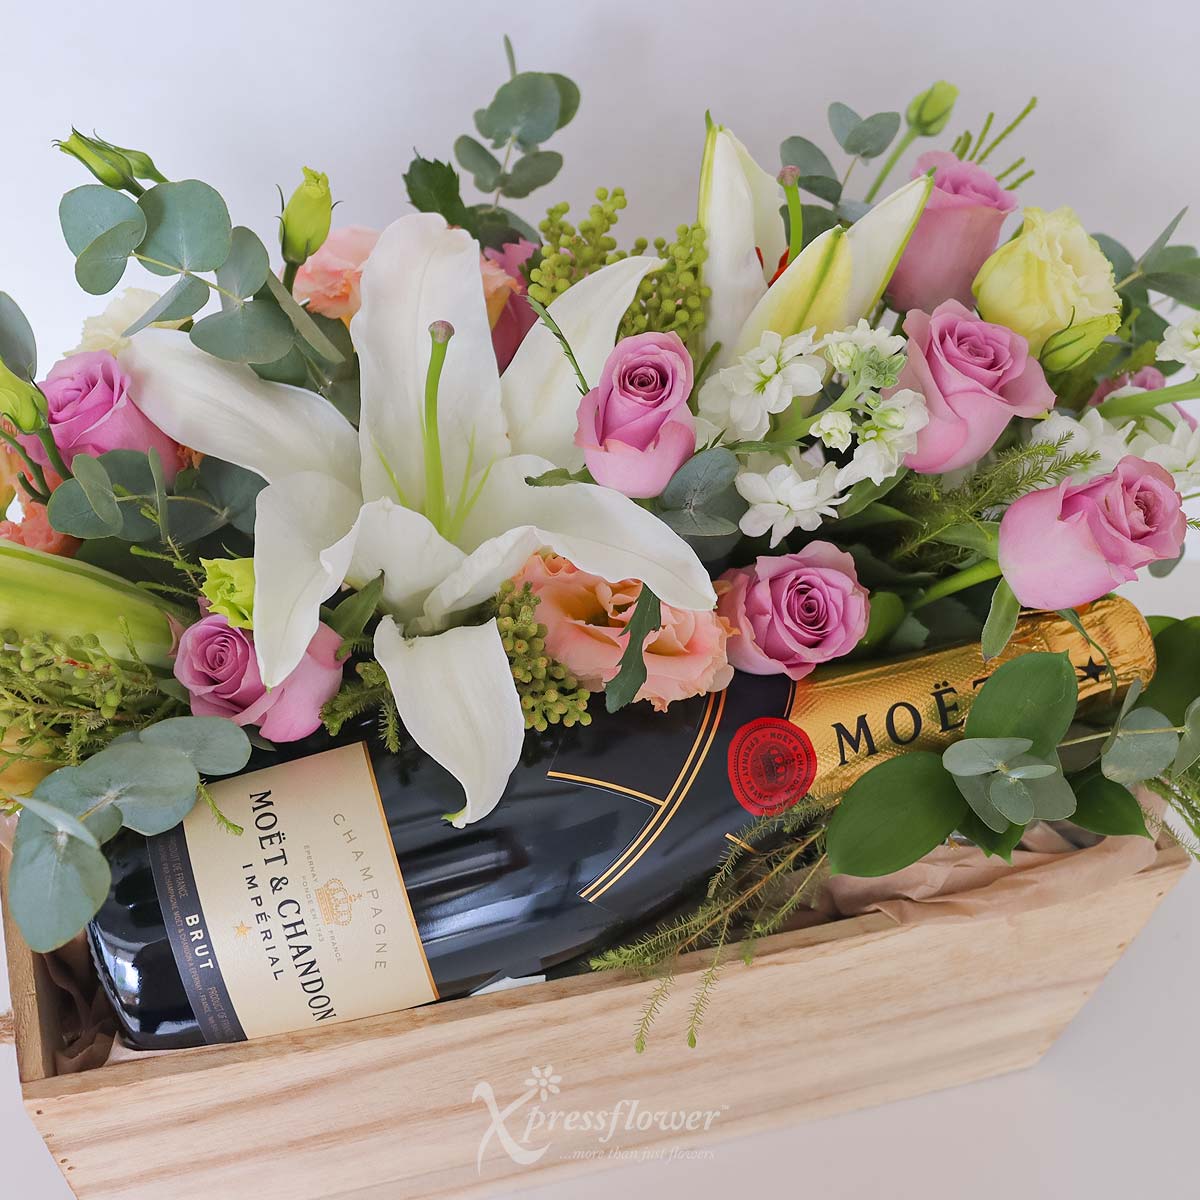 CW2305_Floral Reserve Roses Lilies with Moet Chandon Brut Champagne 1c